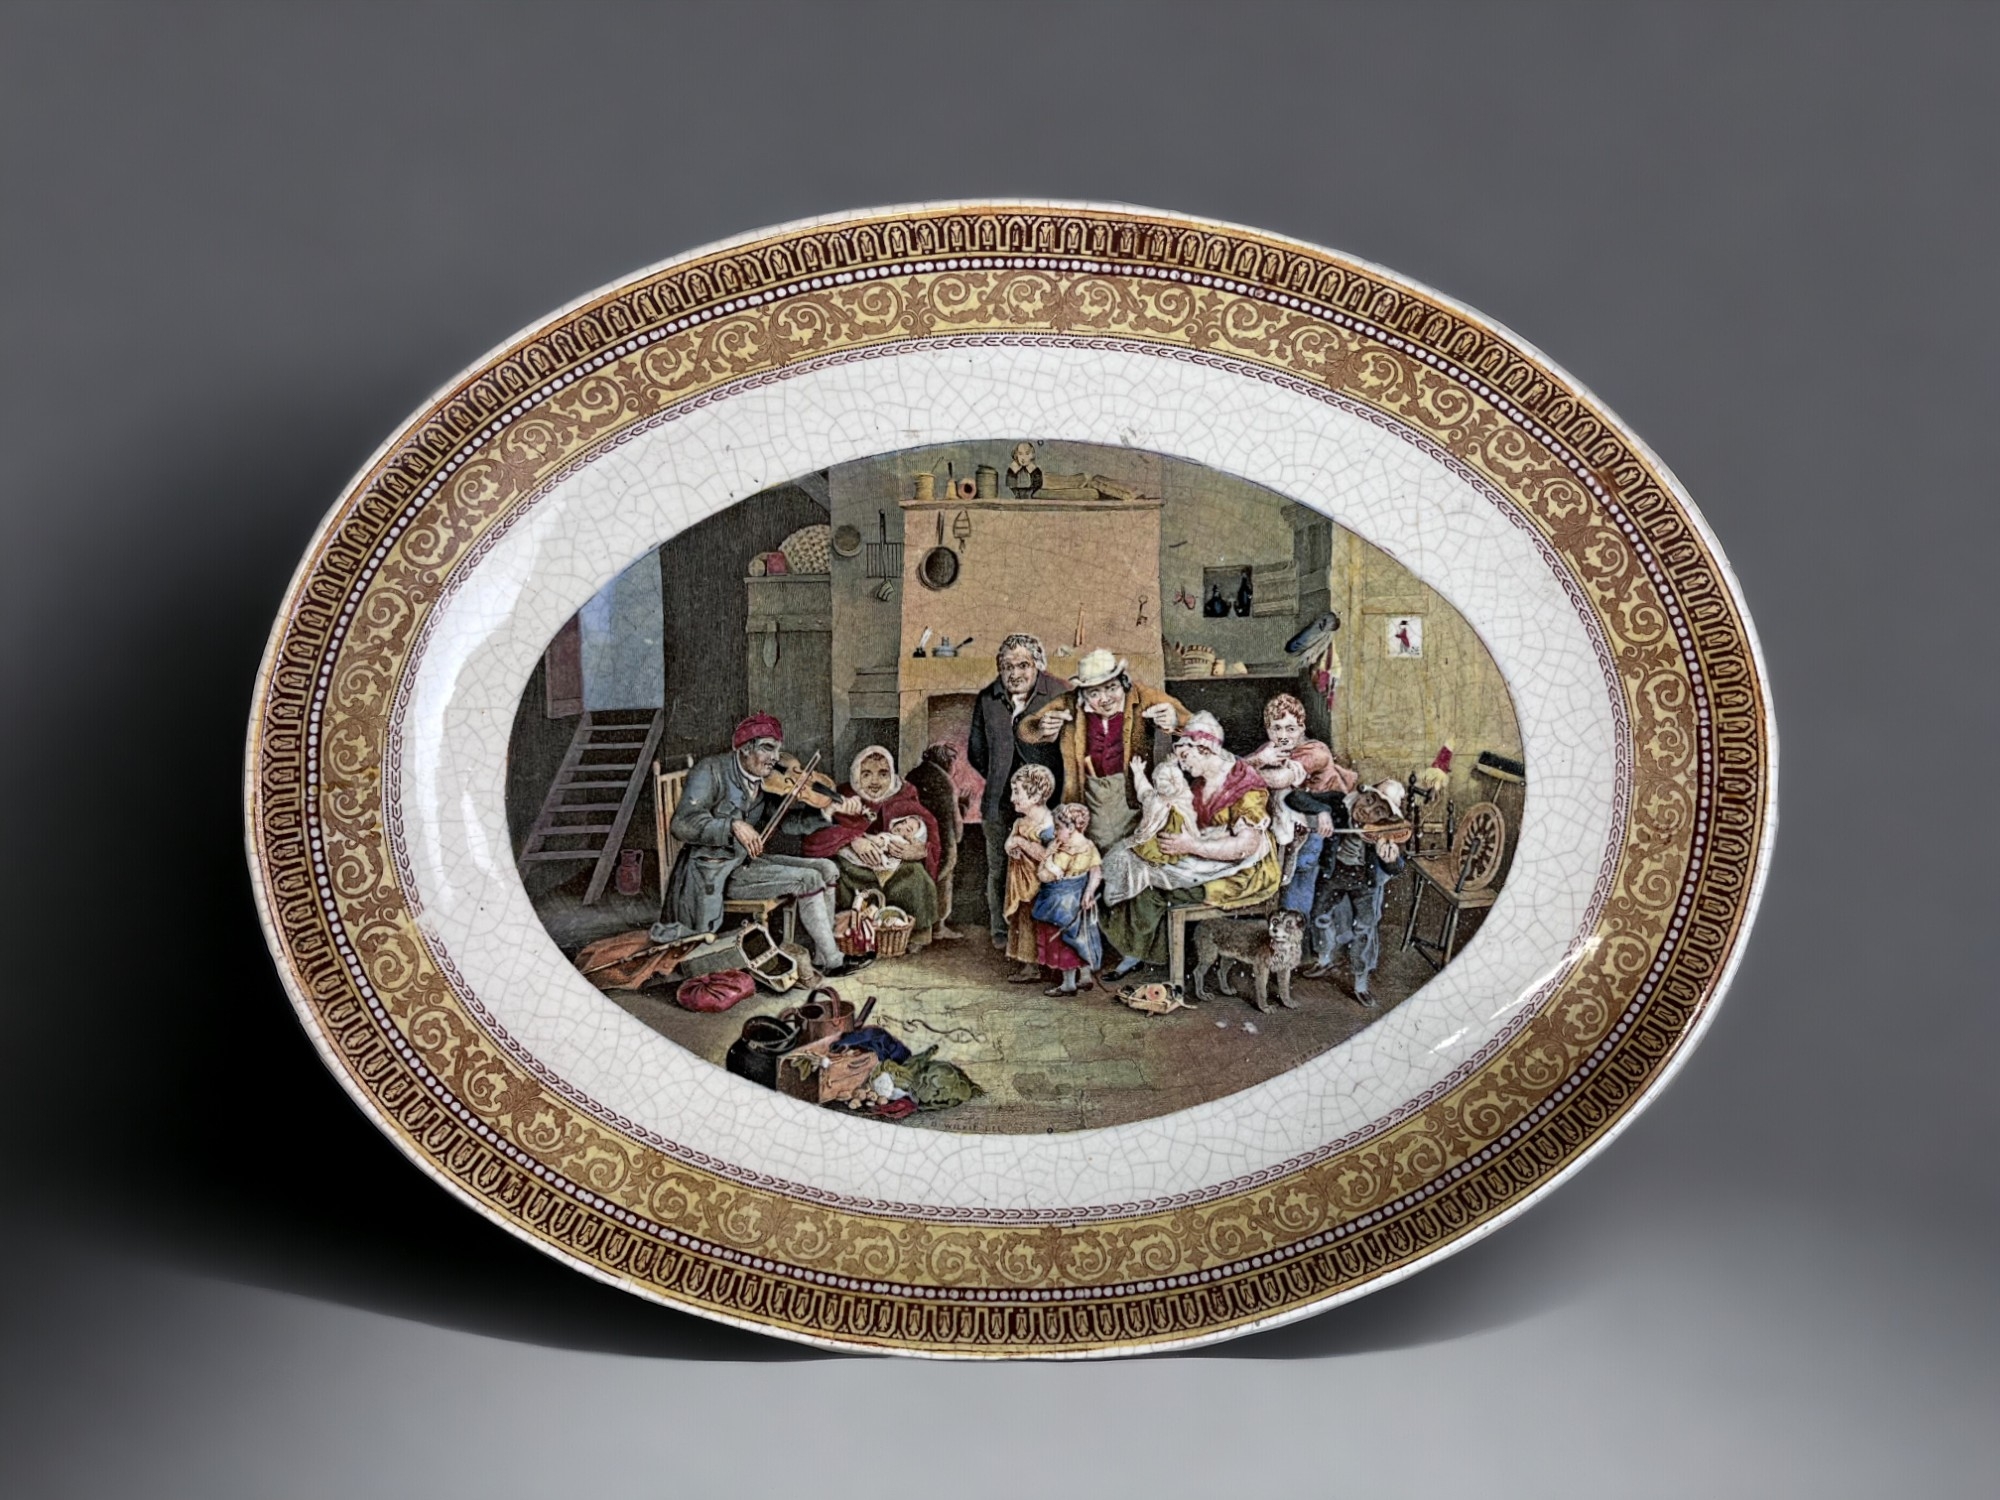 Three 19th century F&R Pratt serving dishes. 'The blind fiddler' pattern, by David Wilkie. With - Image 2 of 5